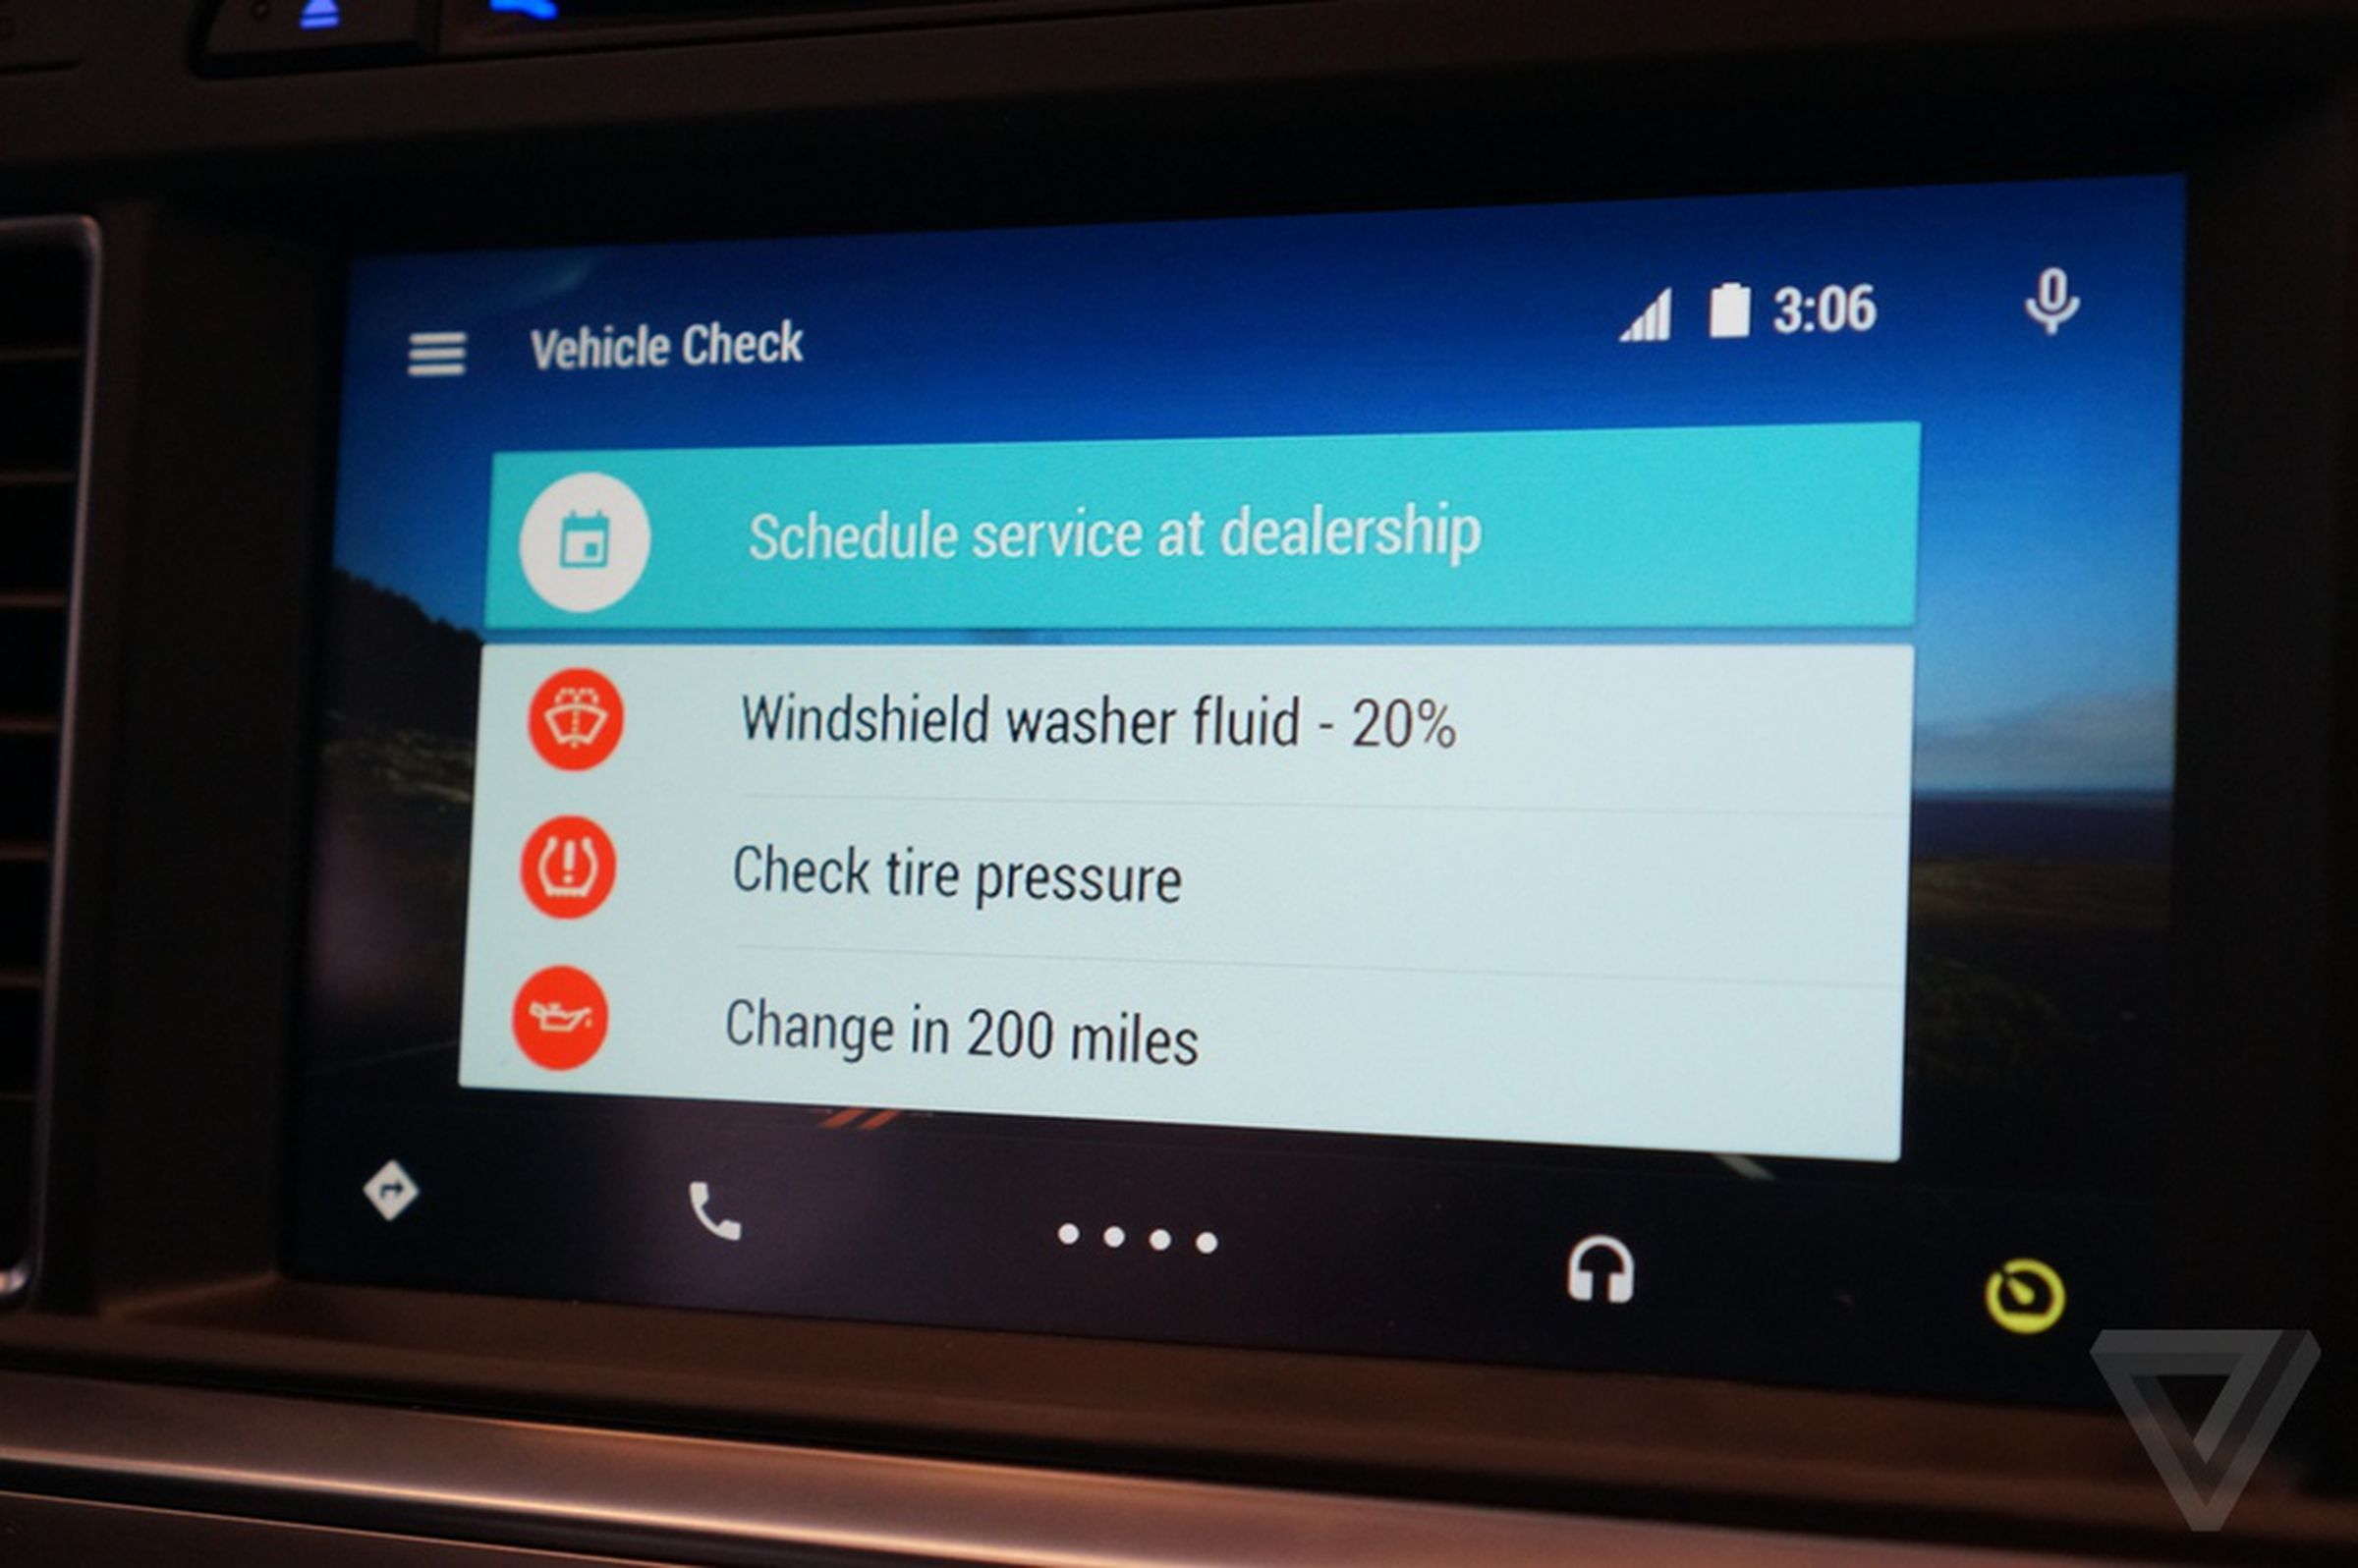 Android Auto pictures